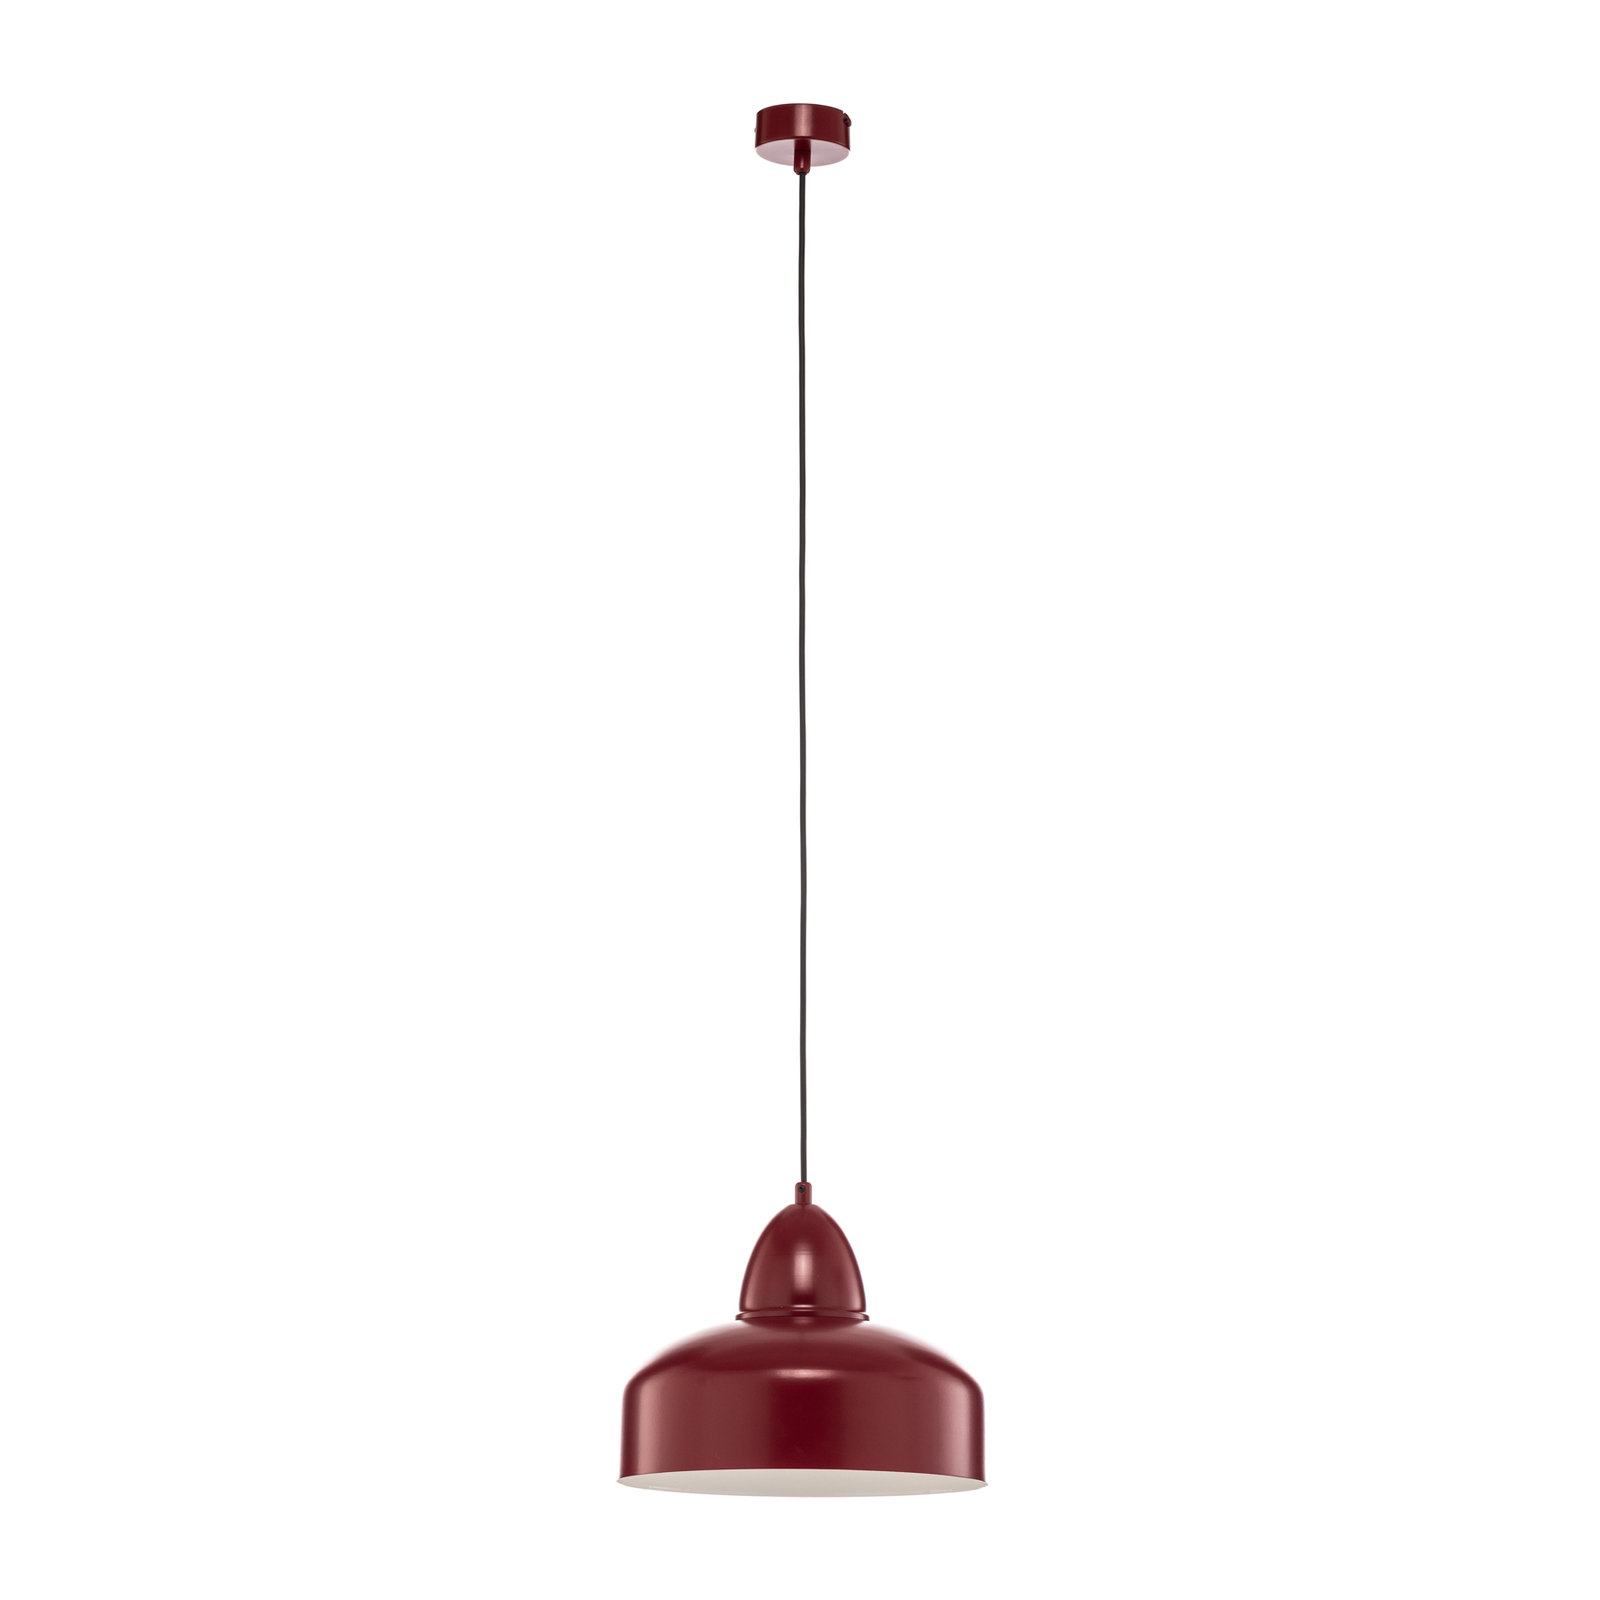 Hanglamp Mille, 1-lamp, wijnrood